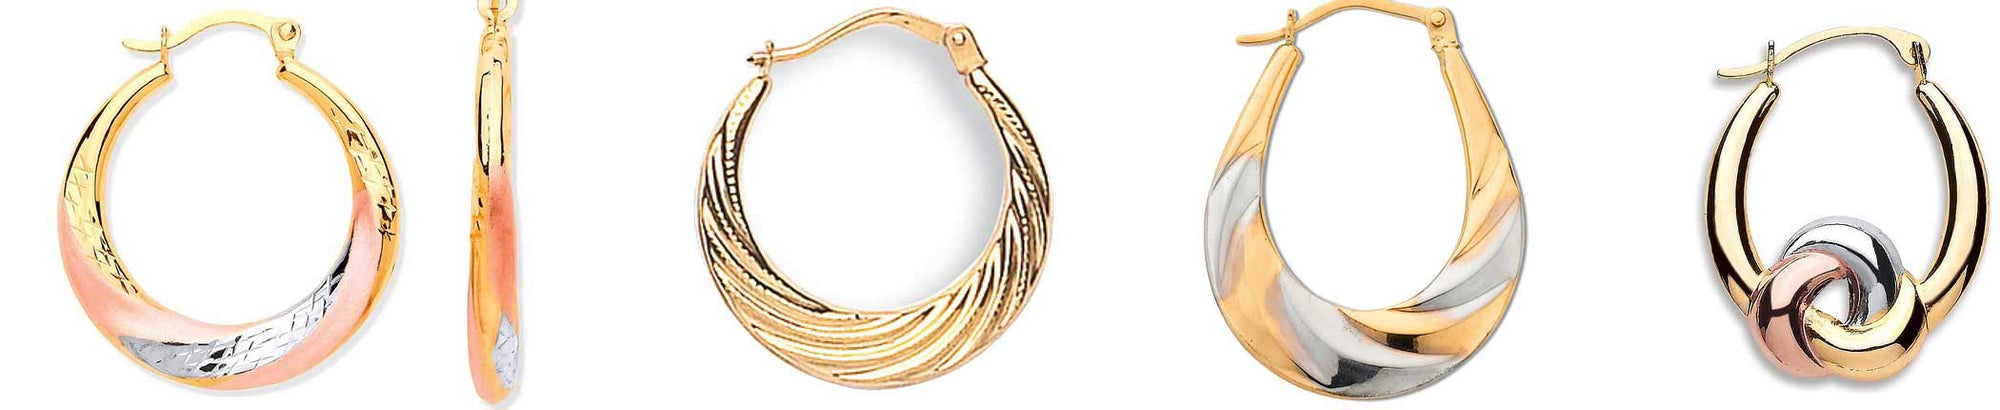 <font color=#000000>Which creole hoop earrings suit your zodiac sign?</font>